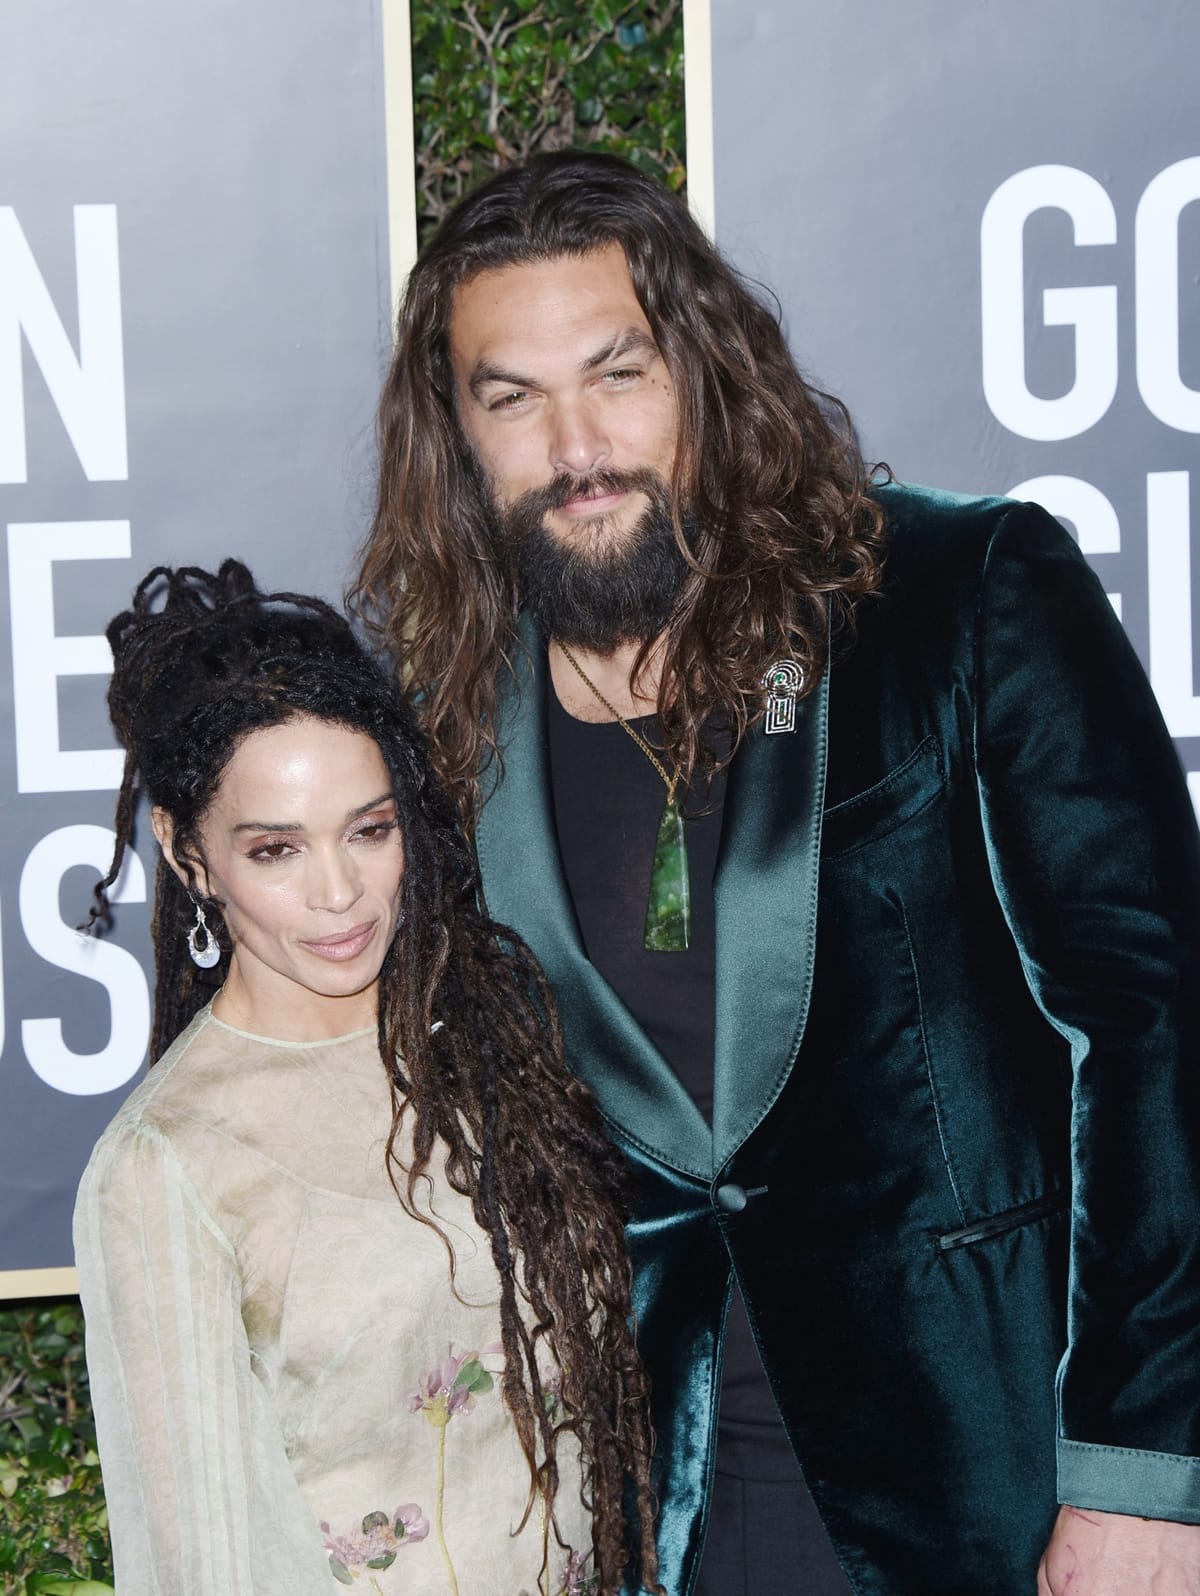 Jason Momoa and Lisa Bonet secretly married in 2017 and have two children together